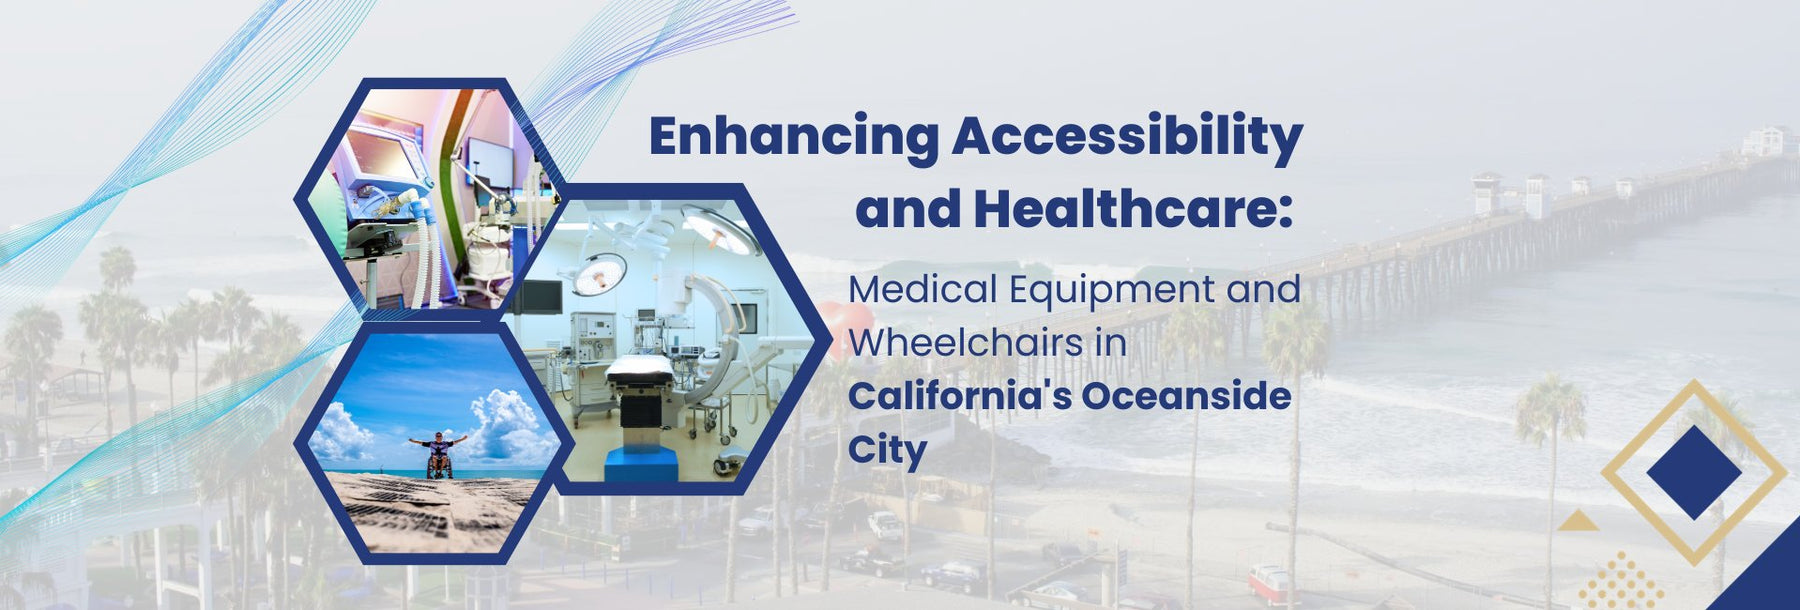 Enhancing Accessibility and Healthcare: Medical Equipment and Wheelchairs in California's Oceanside City - Harmony Home Medical Supply